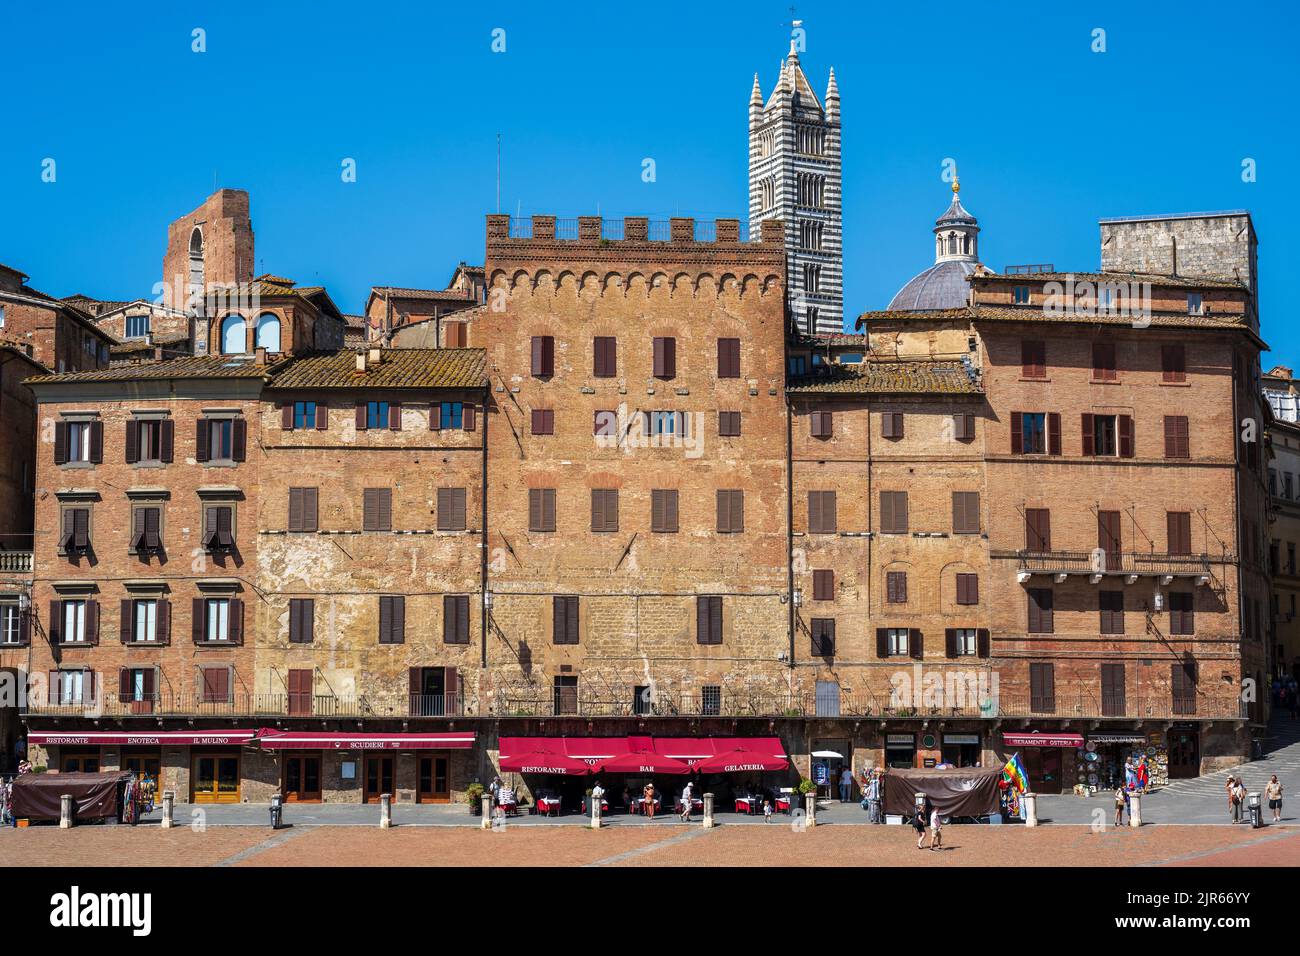 Medieval buildings surrounding Piazza del Campo with the Campanile bell tower in the skyline in Siena, Tuscany, Italy Stock Photo